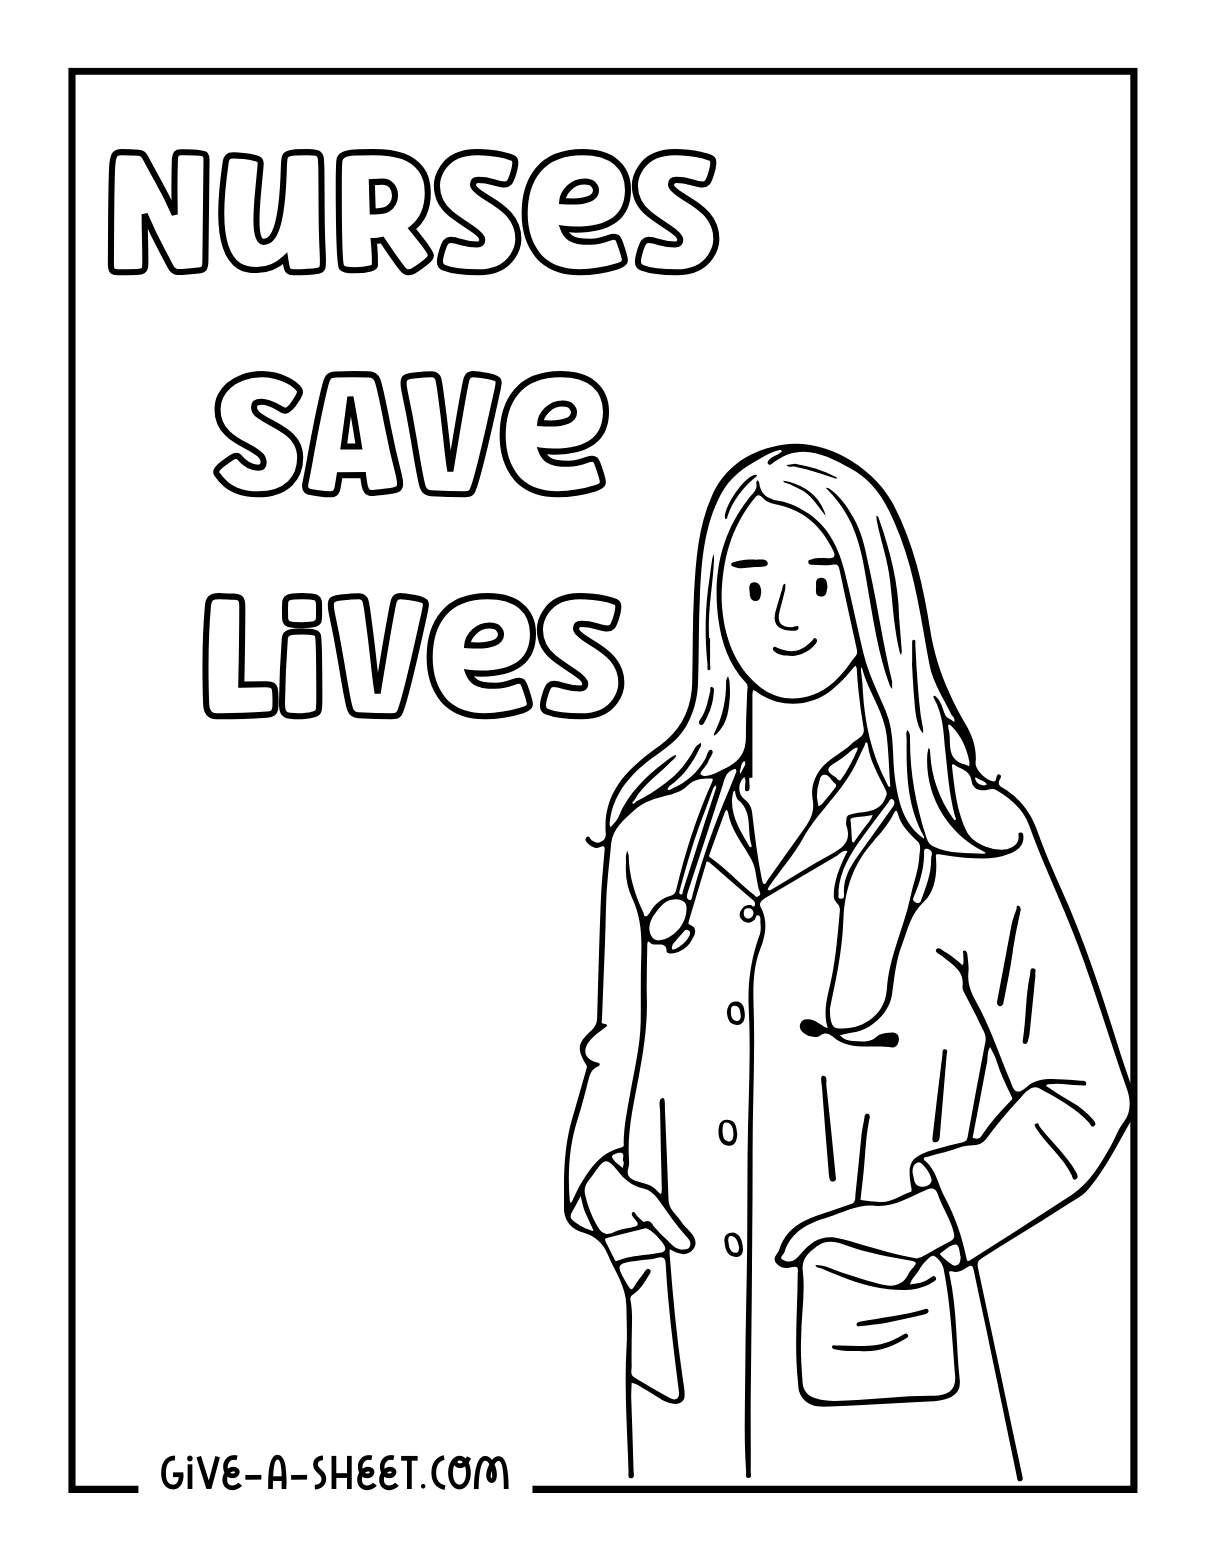 Registered nurse coloring page on the emergency room.